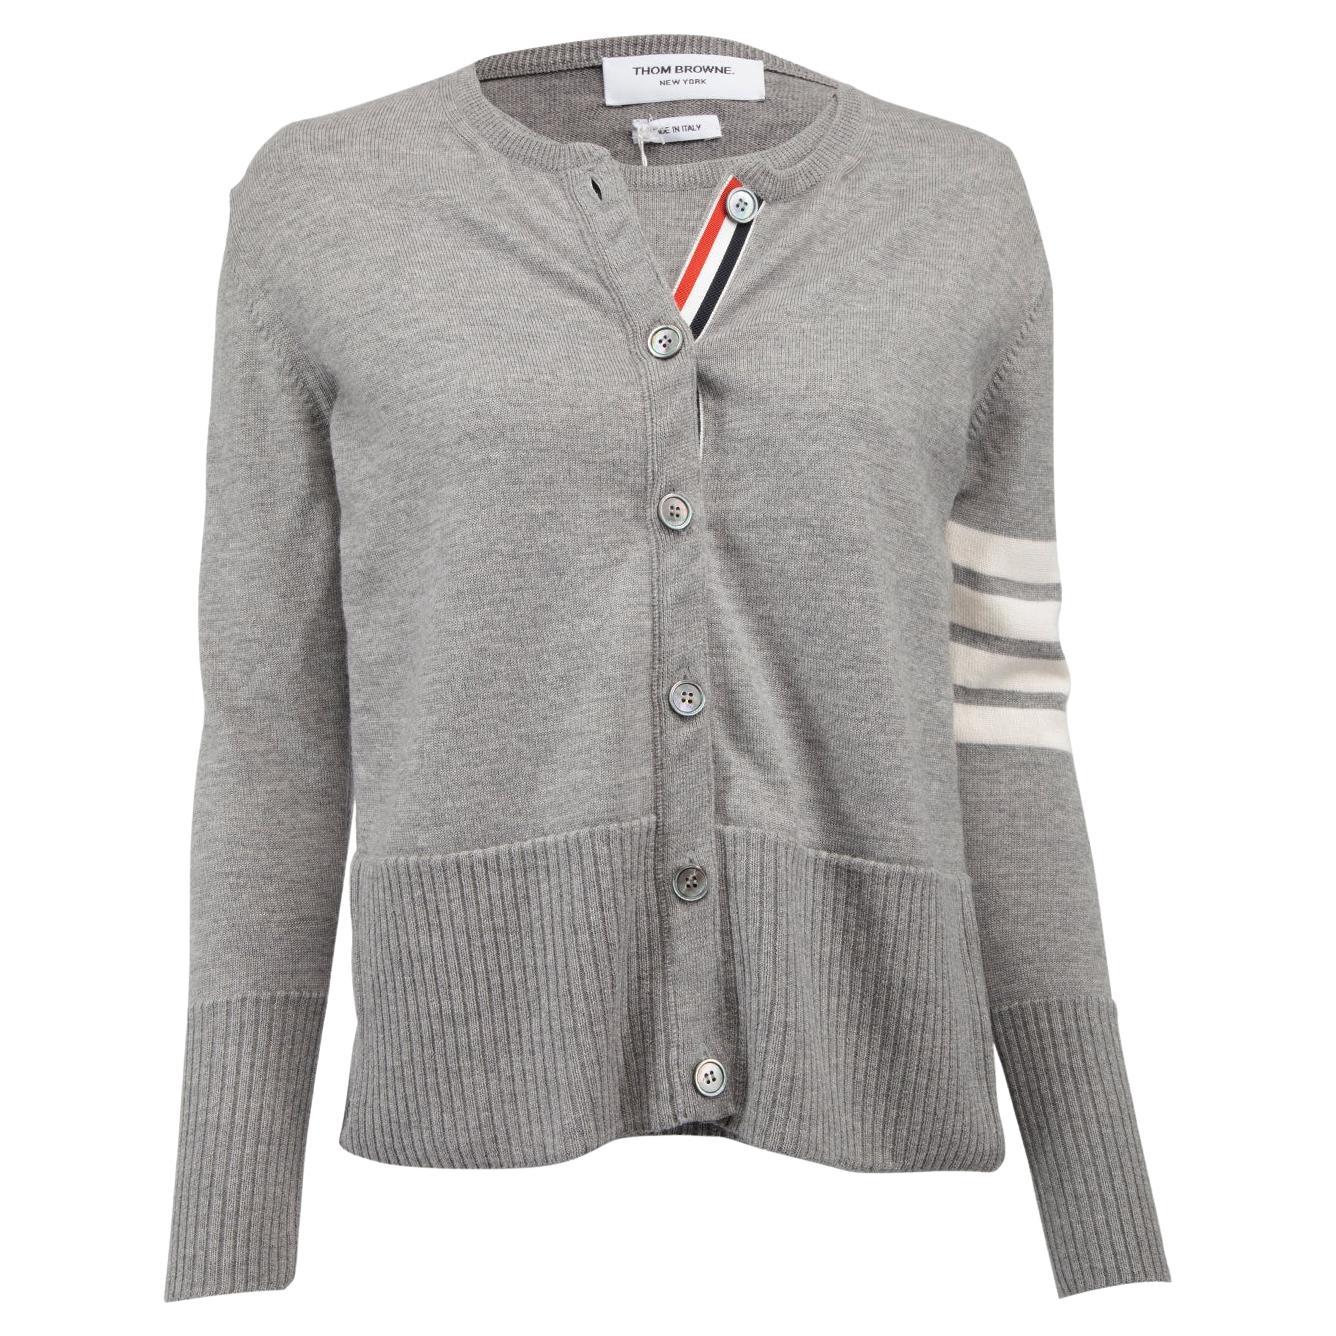 Thom Browne Women's Stripe and Contrast Piping Detail Knit Sweater